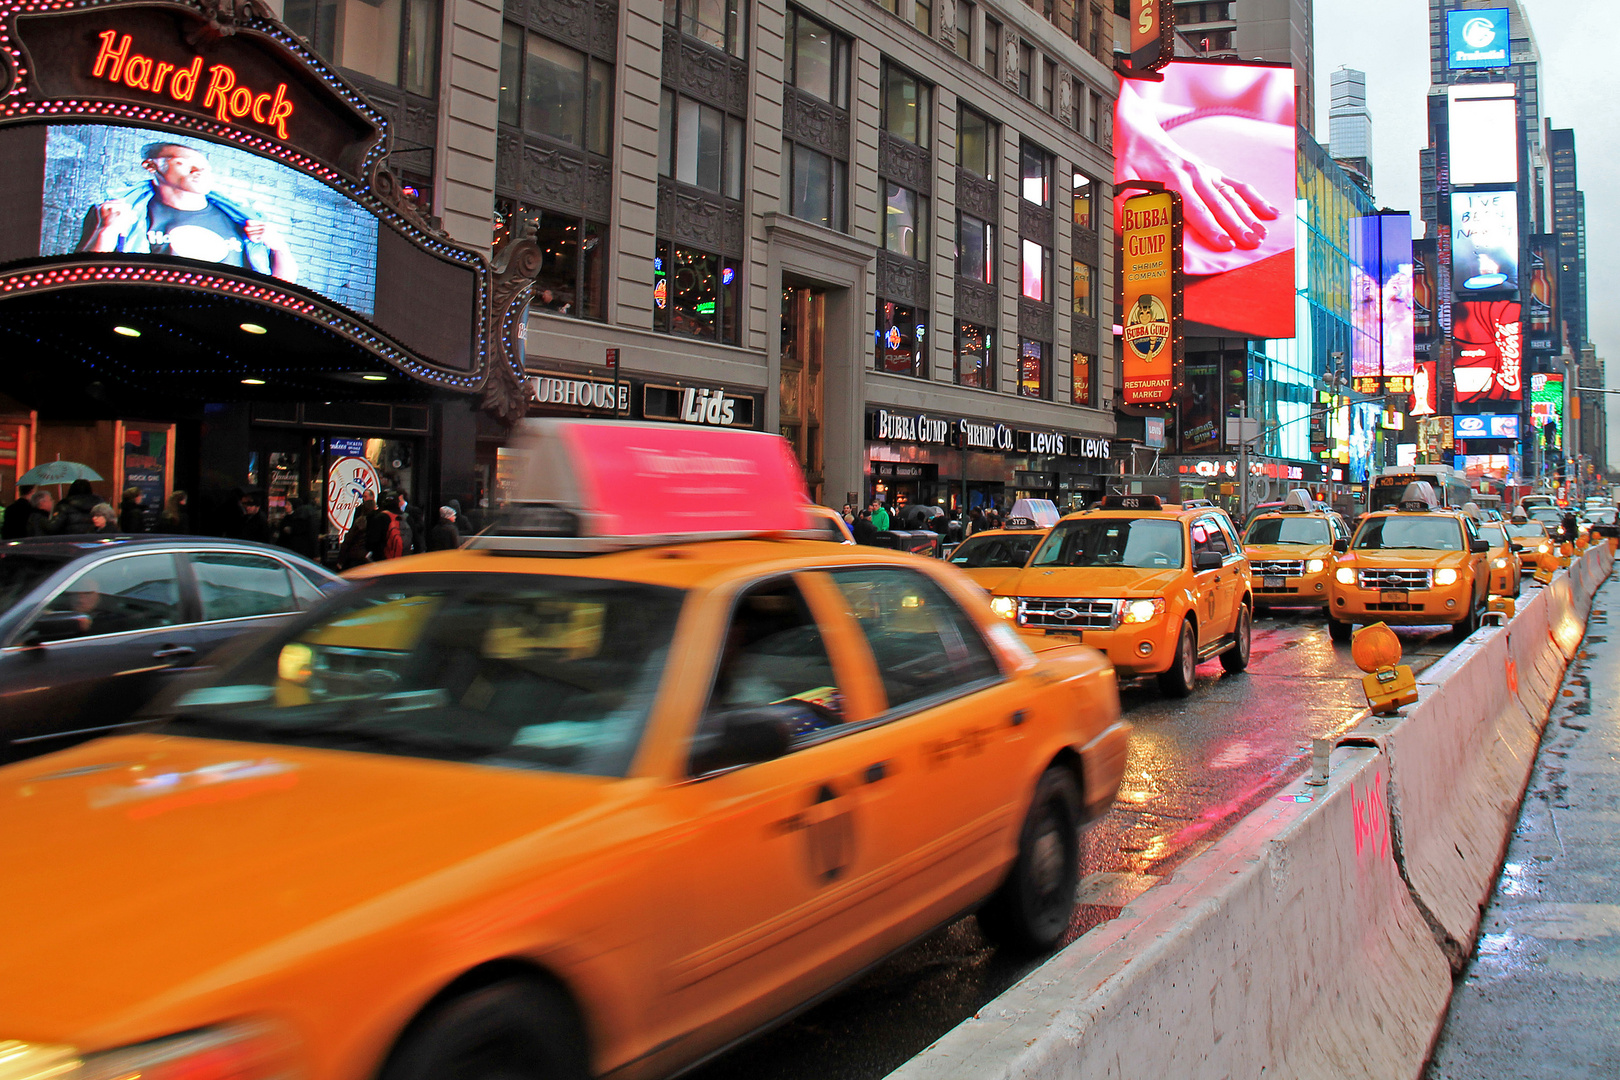 Taxis am Time Square in New York